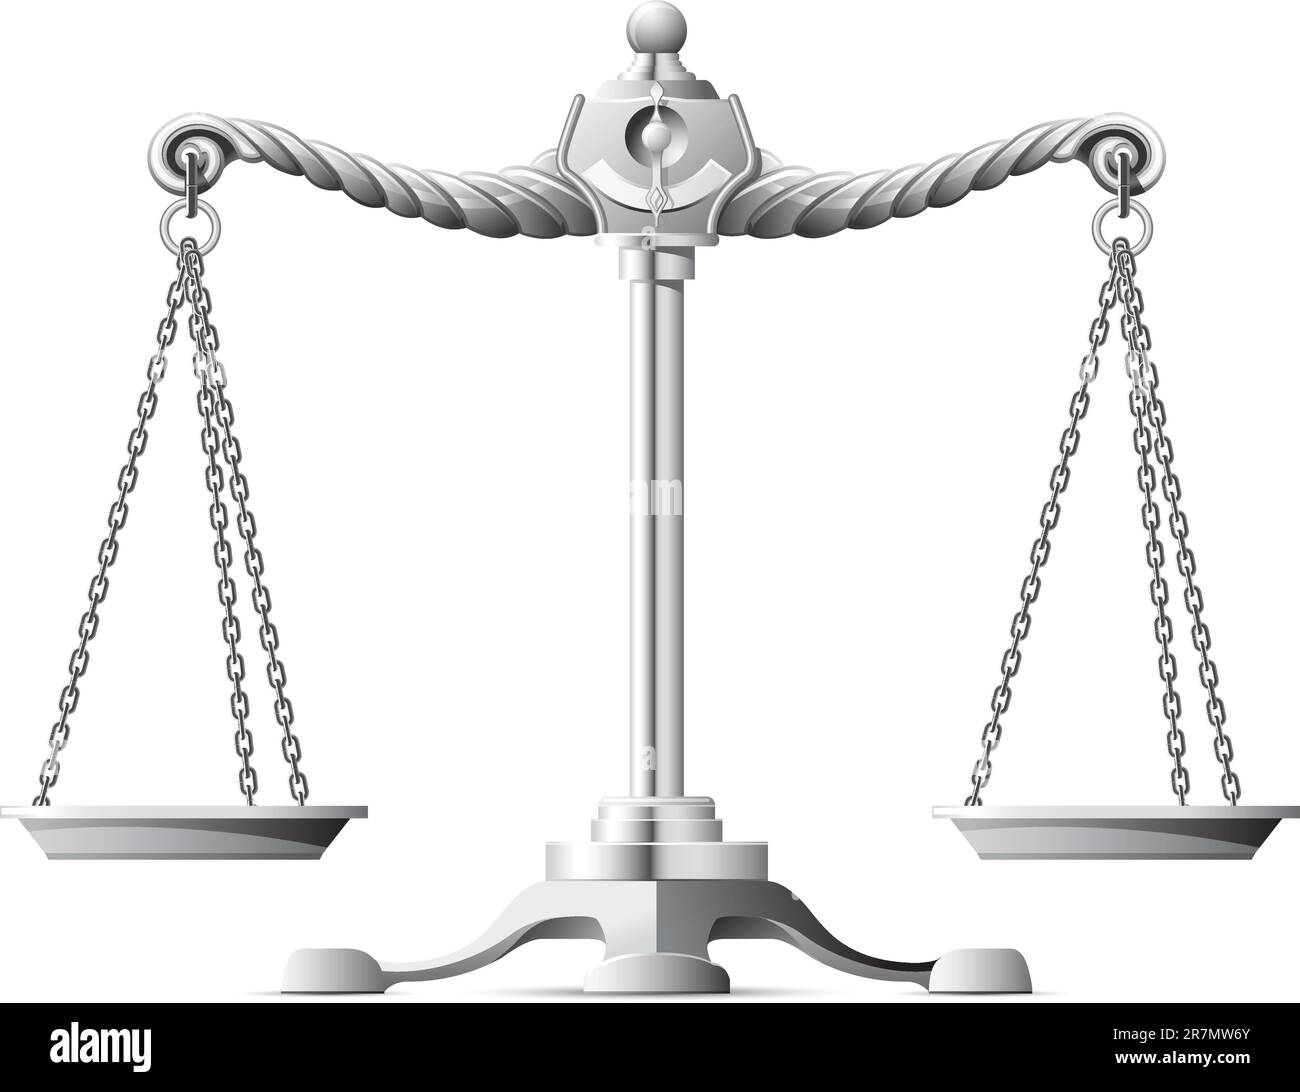 Ornate, silver scale of justice Stock Vector